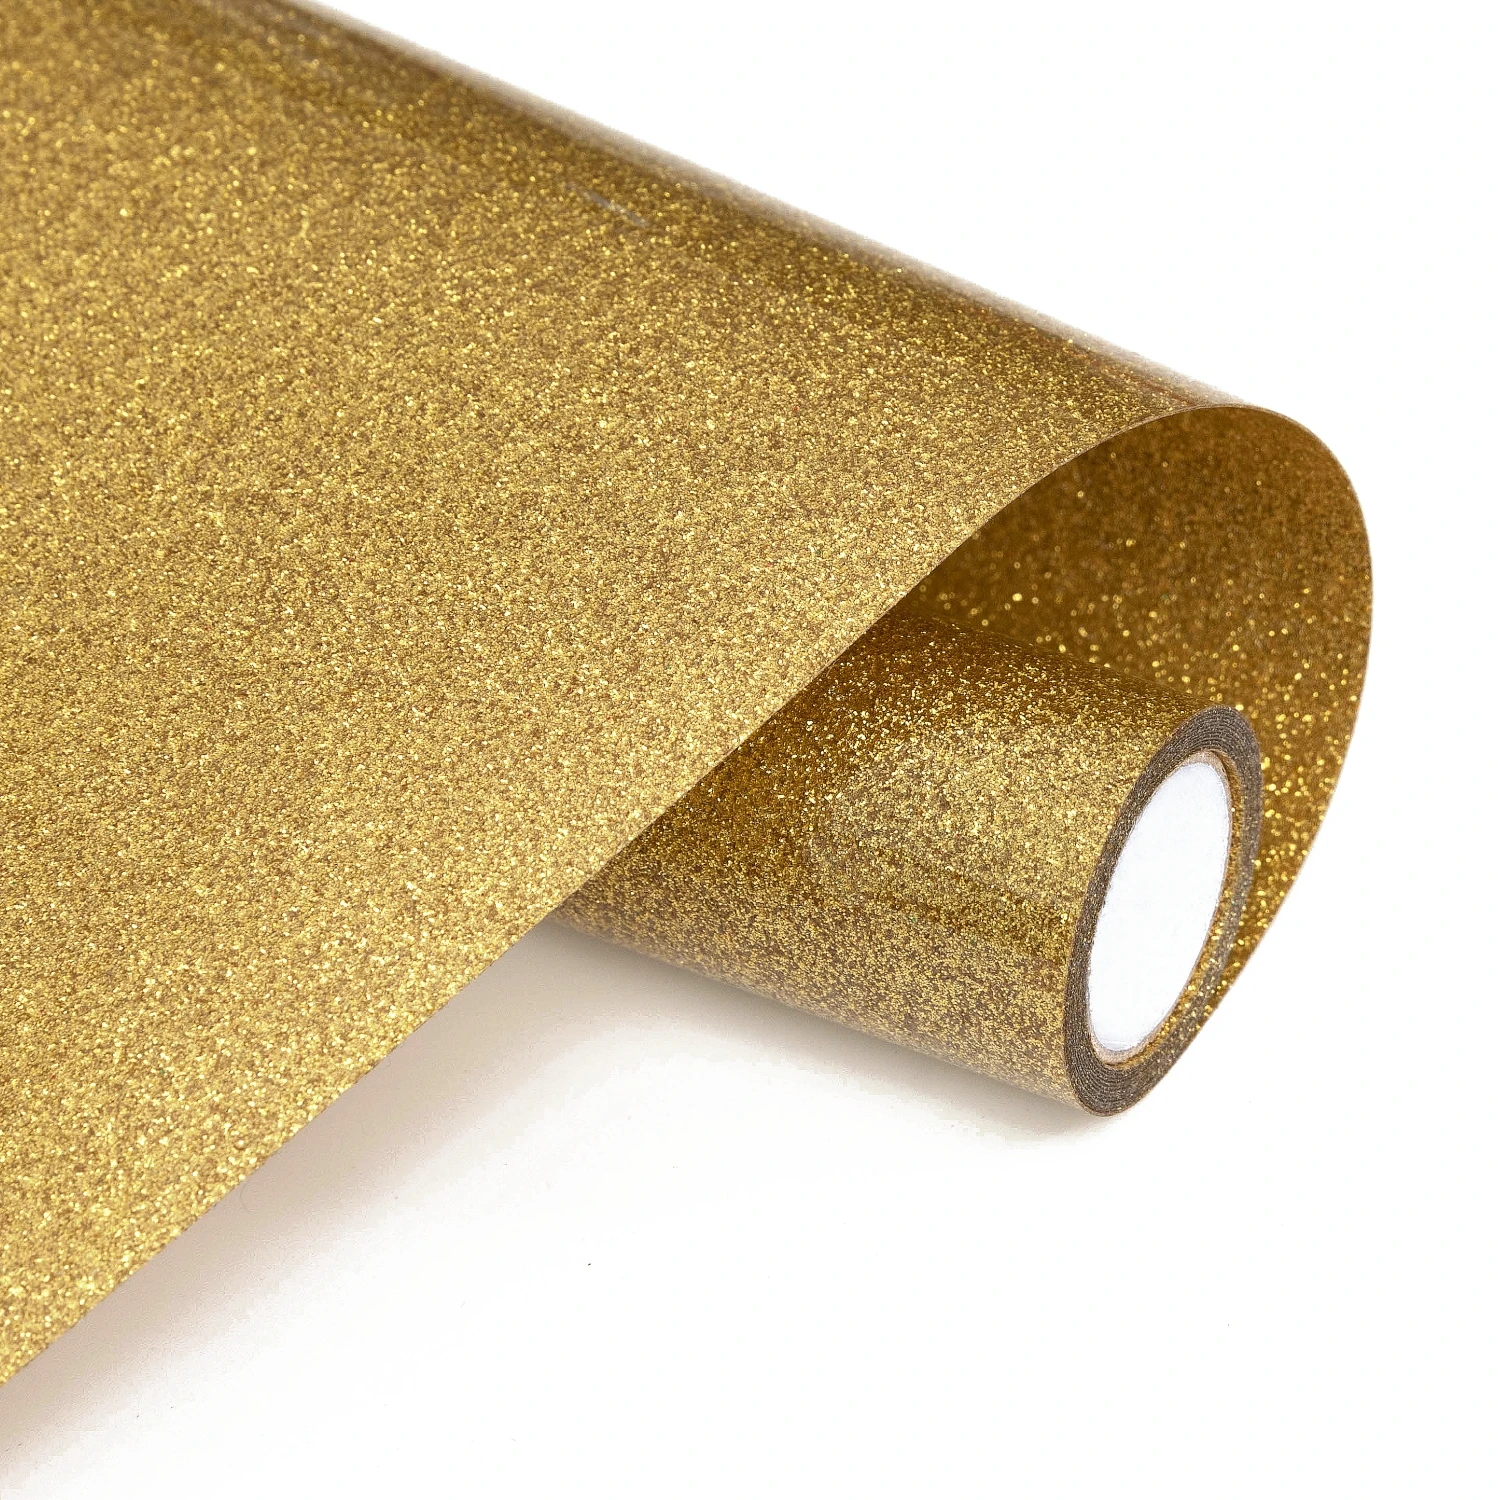 Gold/Silver Adhesive Craft Vinyl Film Roll Permanent Craft Outdoor Decal  DIY Car/Wall/Laptop/Window